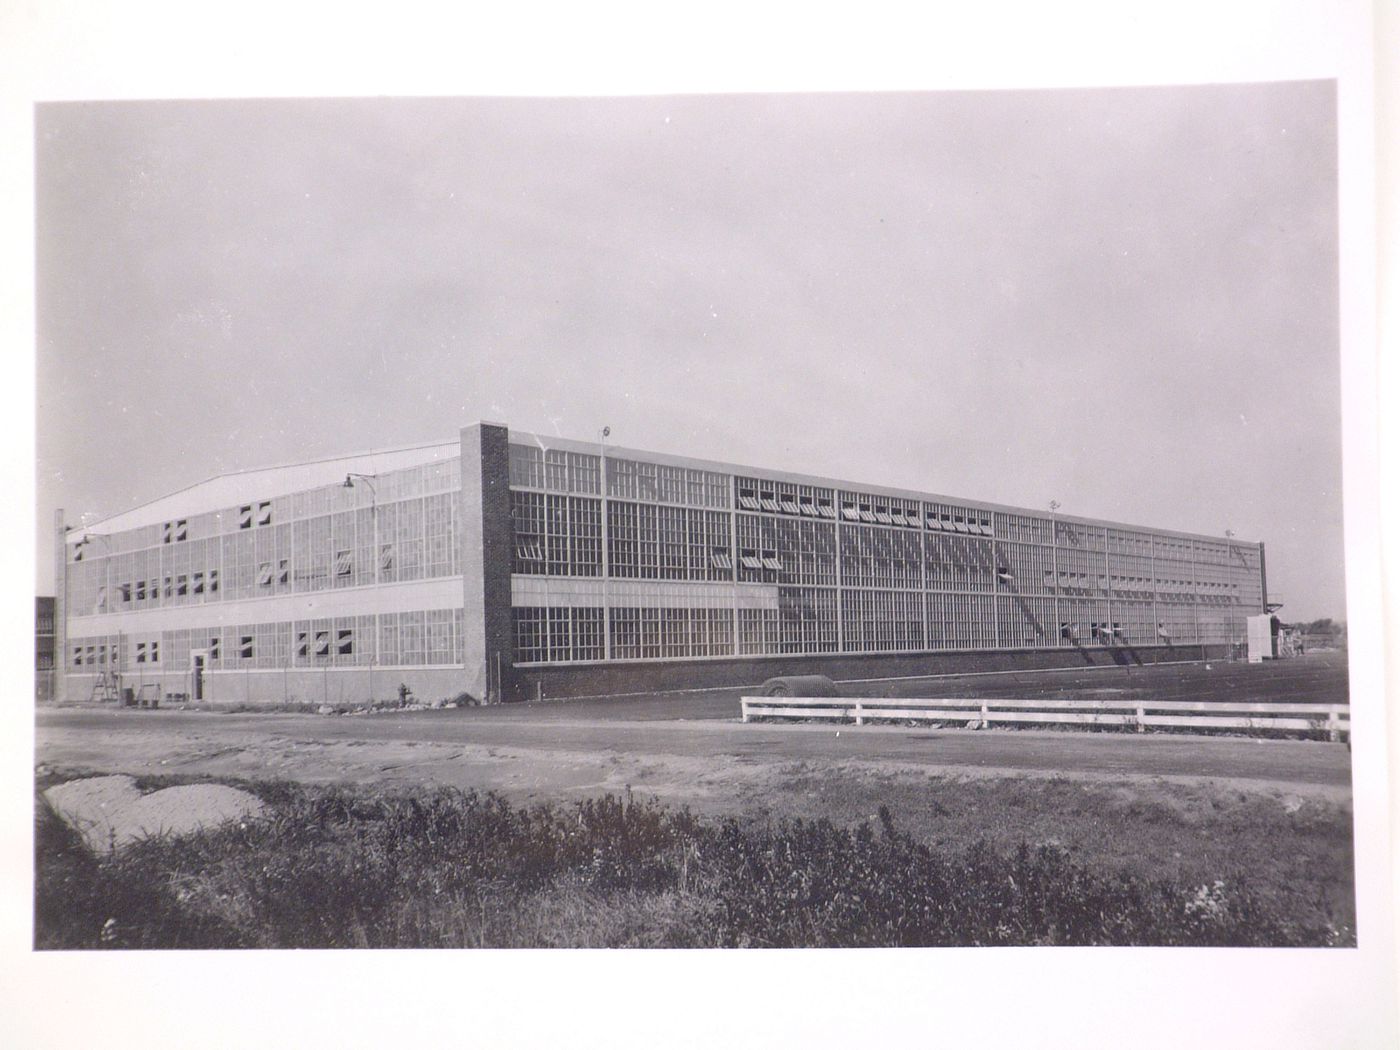 View of the principal and lateral façades of the addition to the Engineering Building, United Aircraft Corporation Chance-Vought Airplane division Assembly Plant, Stratford, Connecticut